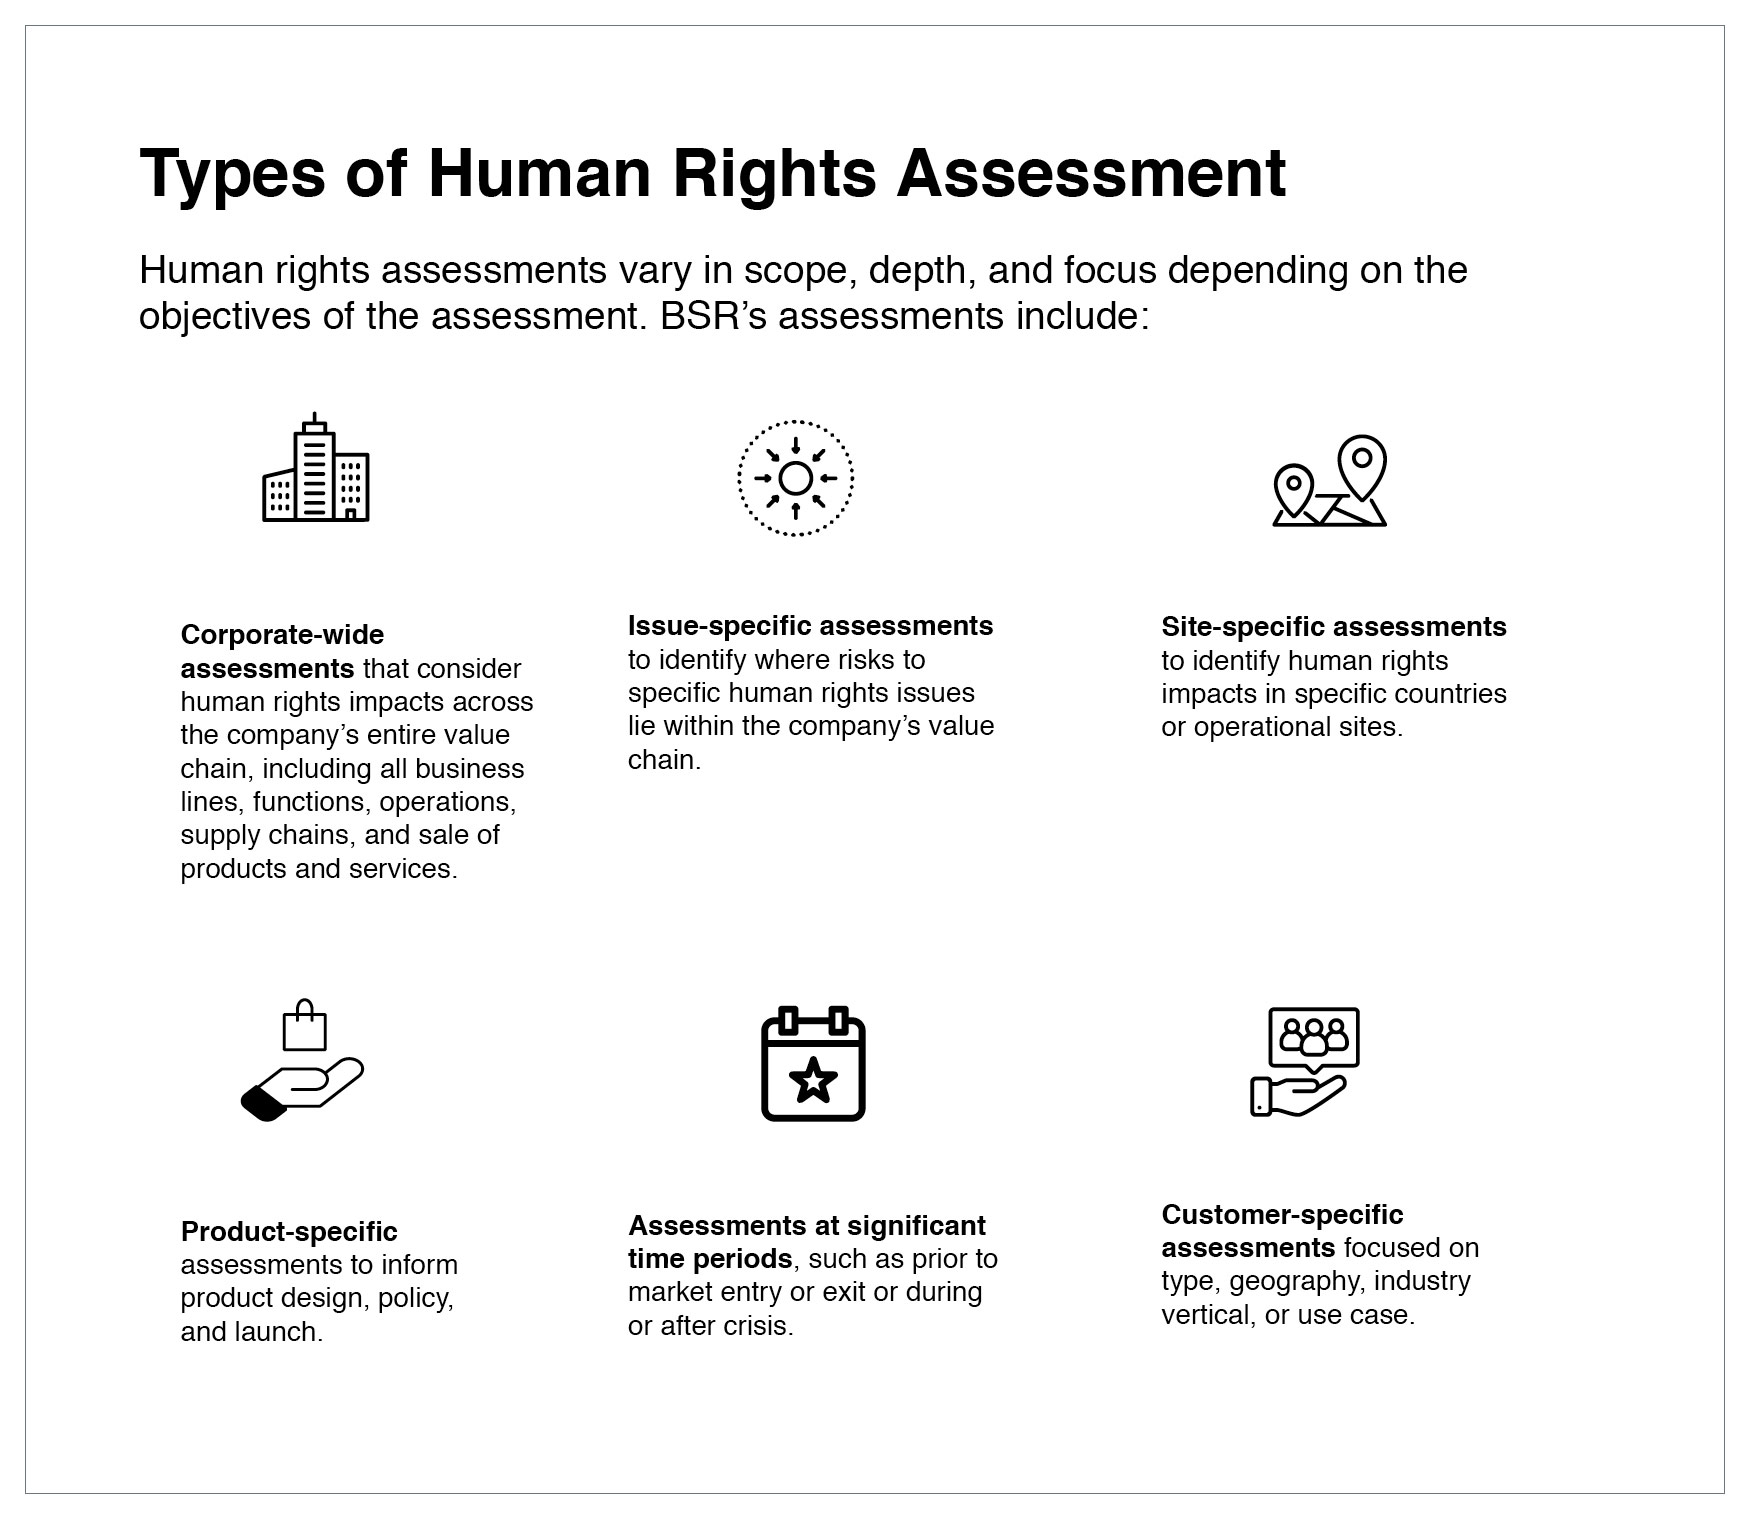 Key Concepts of Human Rights Assessment: Prioritization